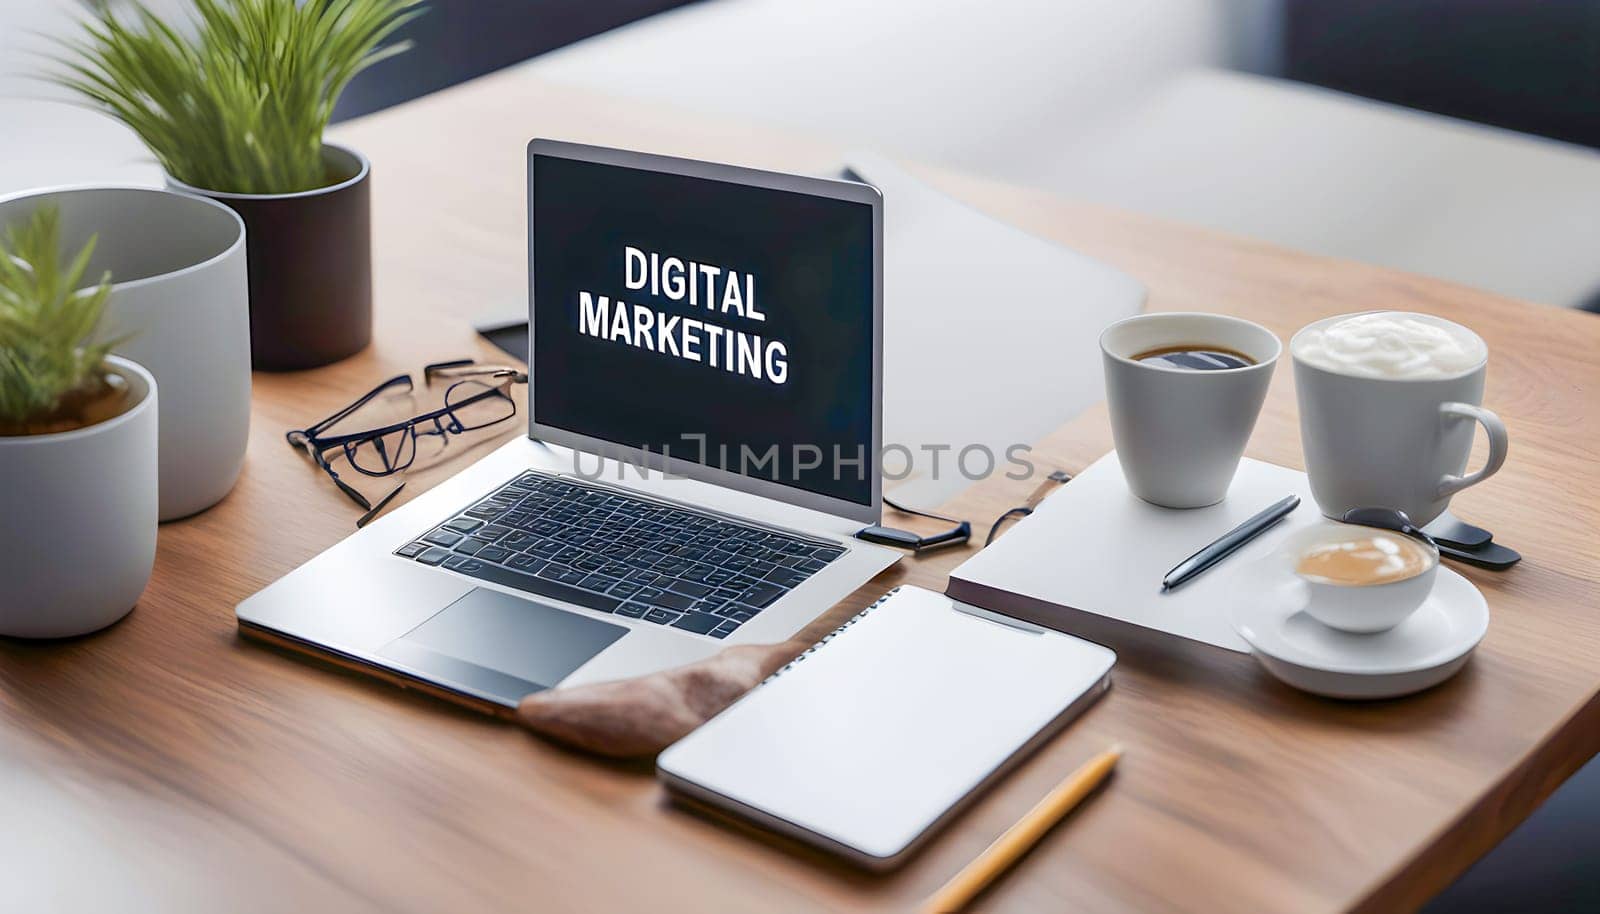 Digital Marketing Concept on Laptop Screen Created by artificial intelligence